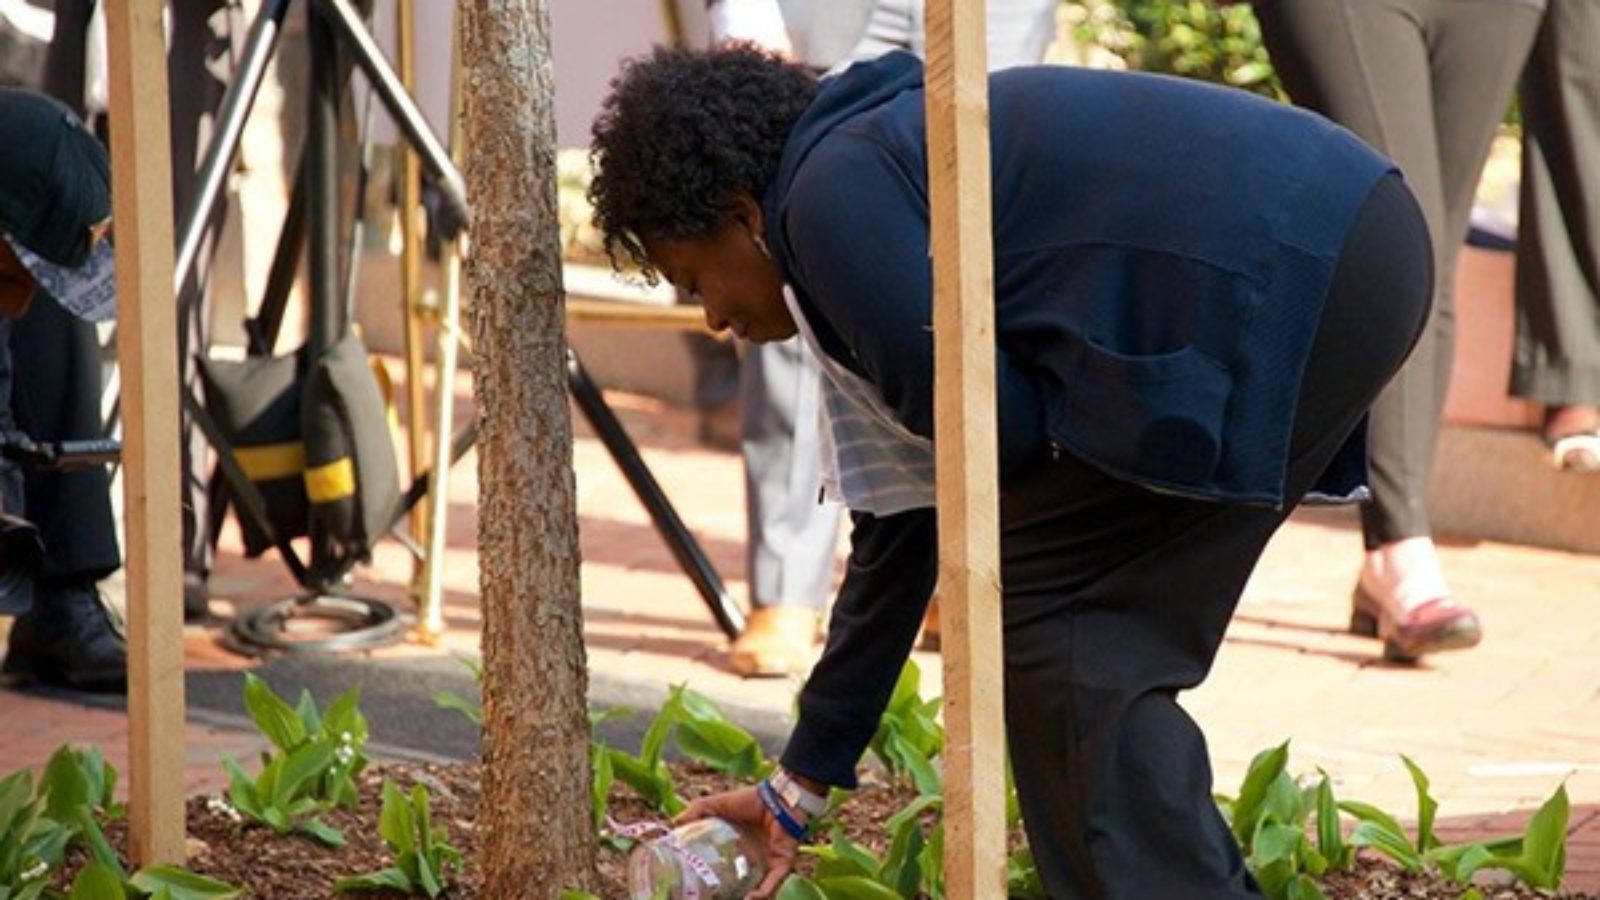 Woman bending down outside to plant a small tree